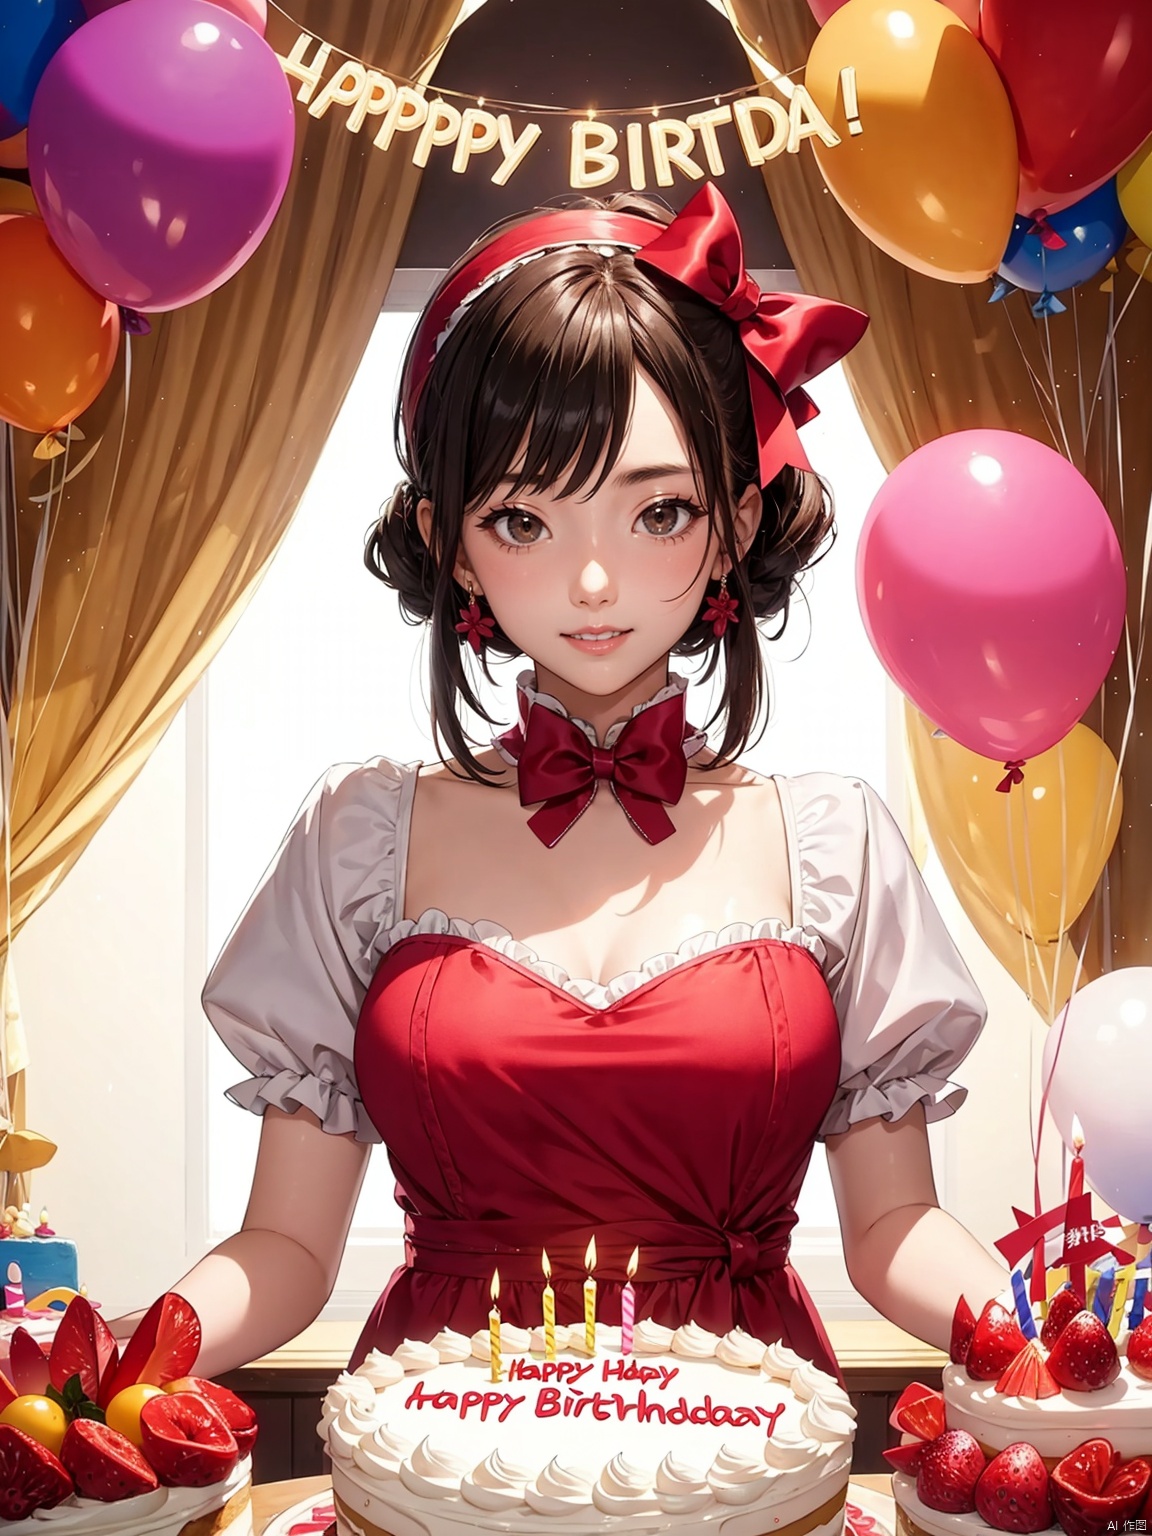  (Masterpiece, best quality)
(detailed light), (an extremely delicate and beautiful), volume light, best shadow, flash, Depth of field, dynamic angle, Oily skin
upper body, 1 Girl on her birthday, extremely detailed big birthday cake,
Colorful Lolita dresses, lots of pretty ruffles, red bows, headbands,
Make a wish
Beautiful elegant room, lots of streamers,balloon
BREAK
生日快乐歌：
Happy birthday to you
Happy birthday to you
Happy birthday, happy birthday
Happy birthday to you
